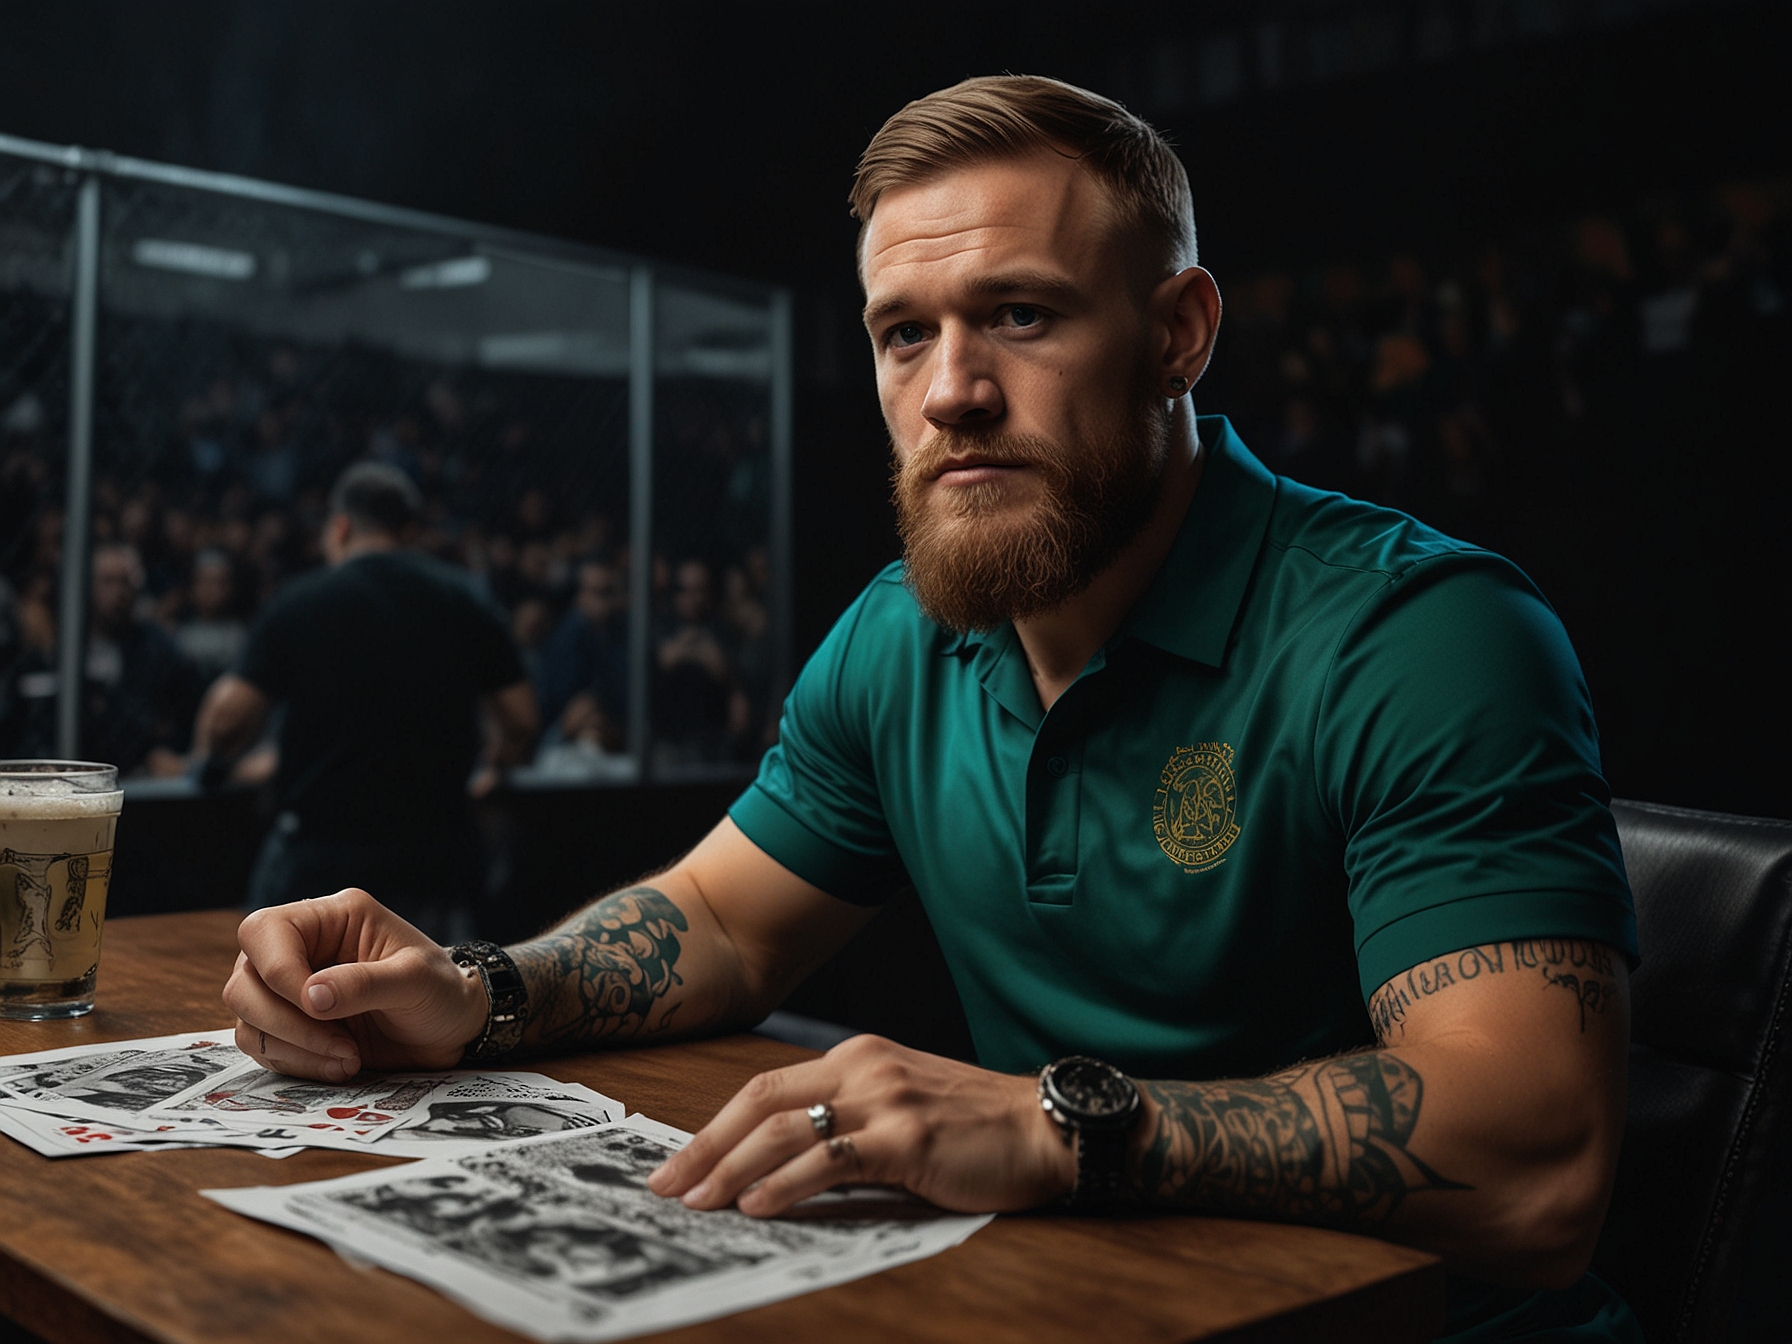 An image of Conor McGregor engaging with fans on social media. He shares updates on his recovery, illustrating his connection with supporters and his transparency about his journey back to the octagon.